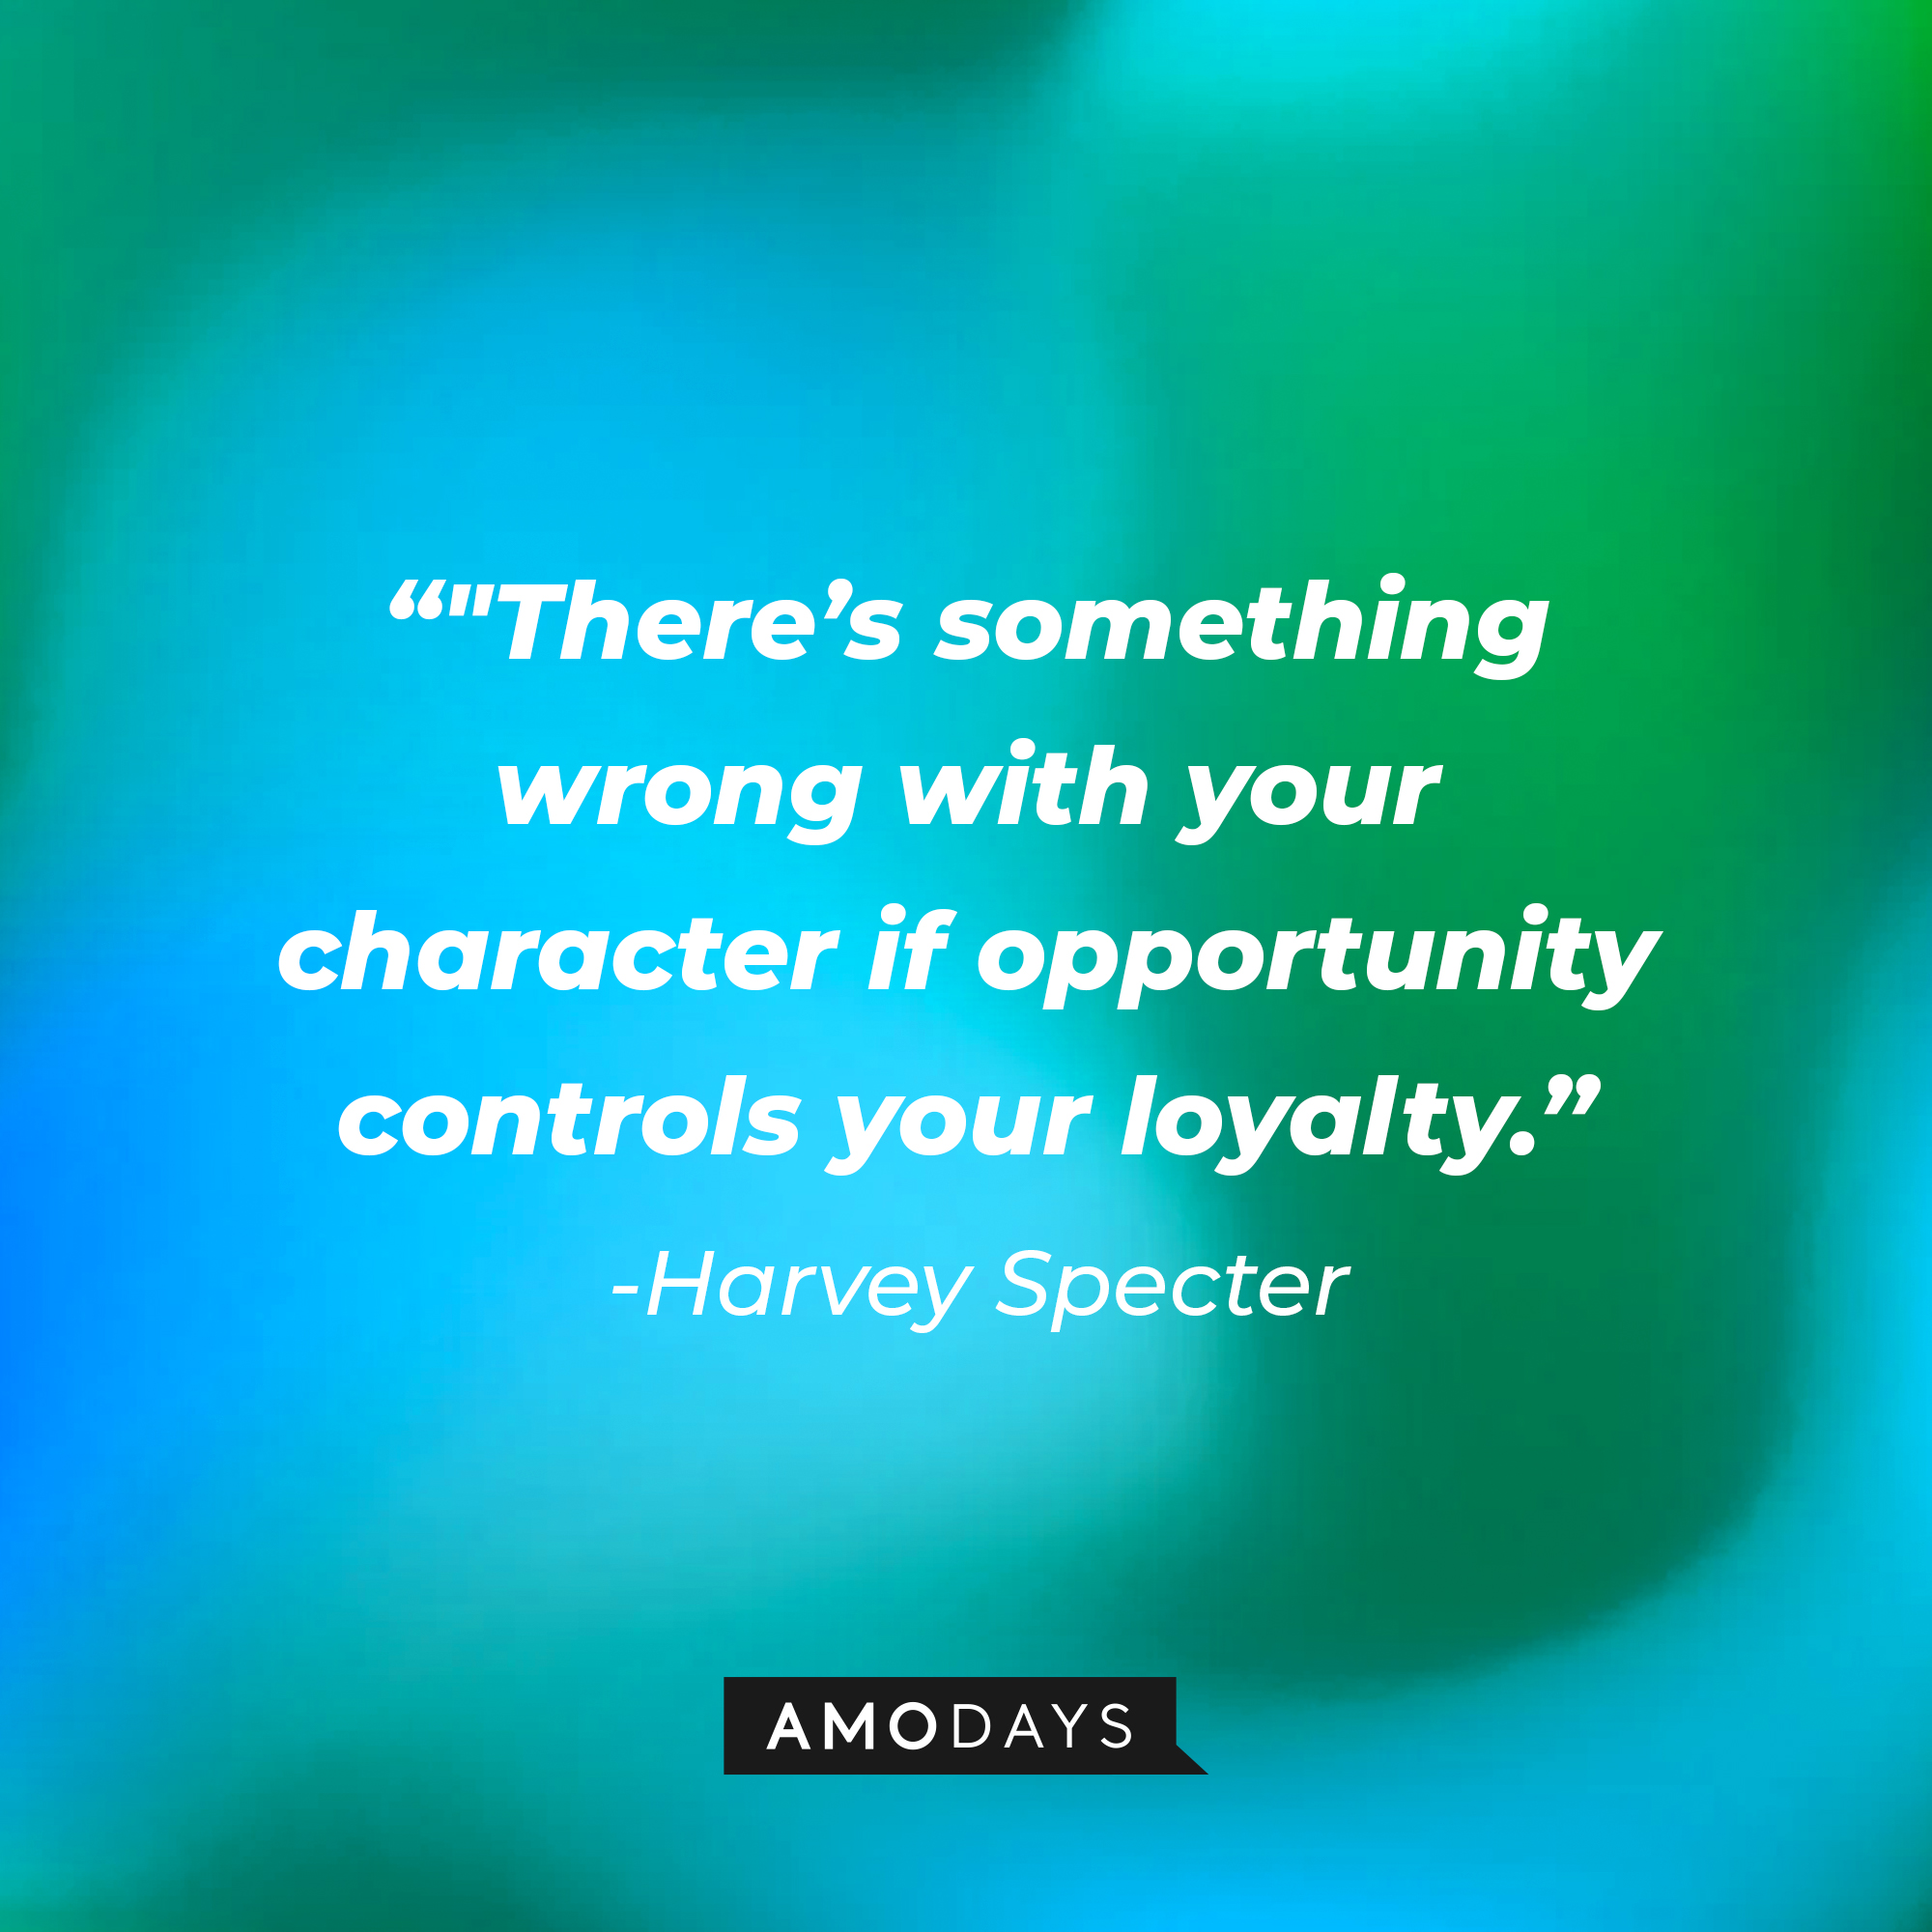 Harvey Specter's quote from "Suits" : "There's something wrong with your character if opportunity controls your loyalty." | Source: Amodays